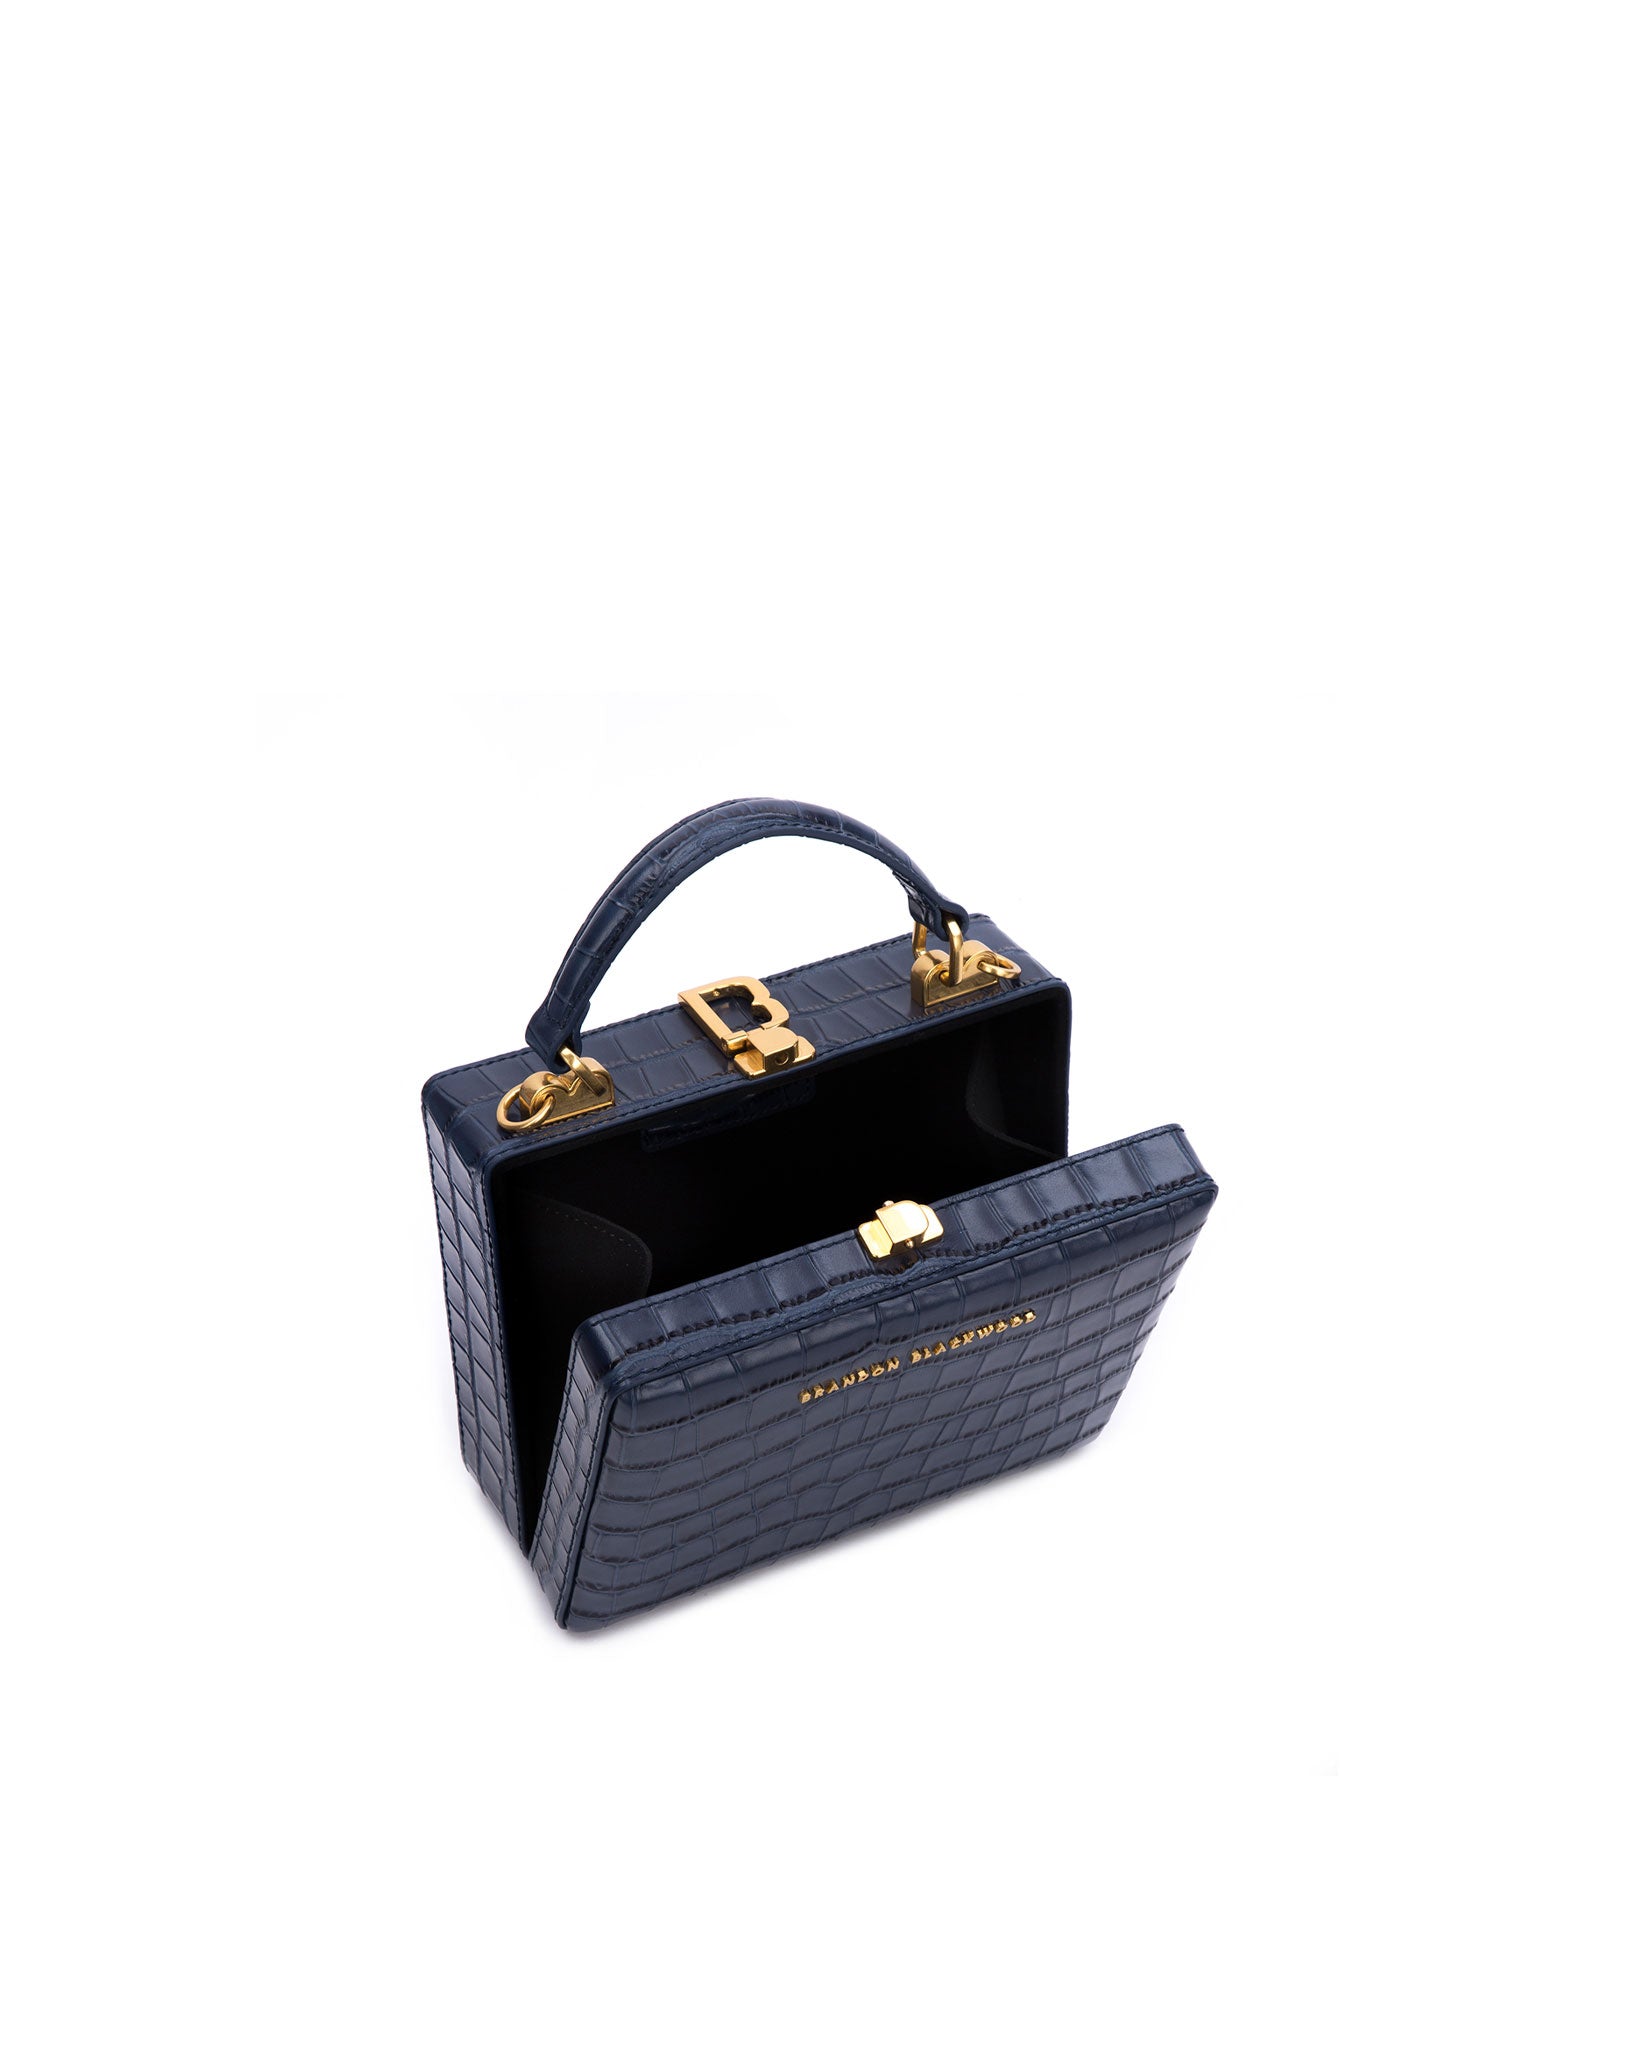 Aspinal of London Trunk Mini Croc-embossed Leather Clutch Bag in